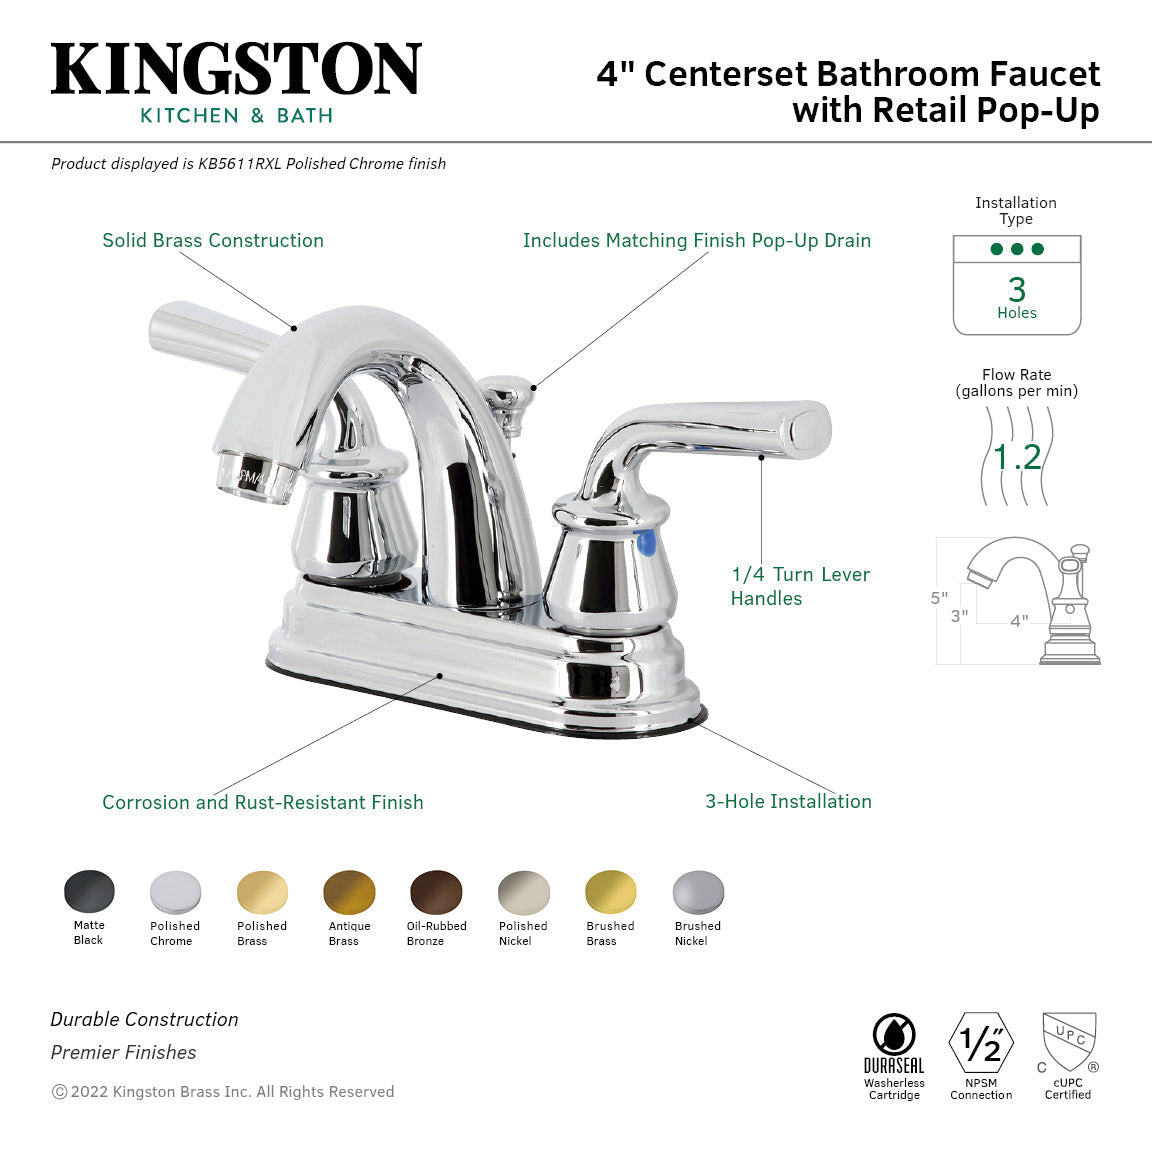 Restoration KB5616RXL Two-Handle 3-Hole Deck Mount 4" Centerset Bathroom Faucet with Plastic Pop-Up, Polished Nickel